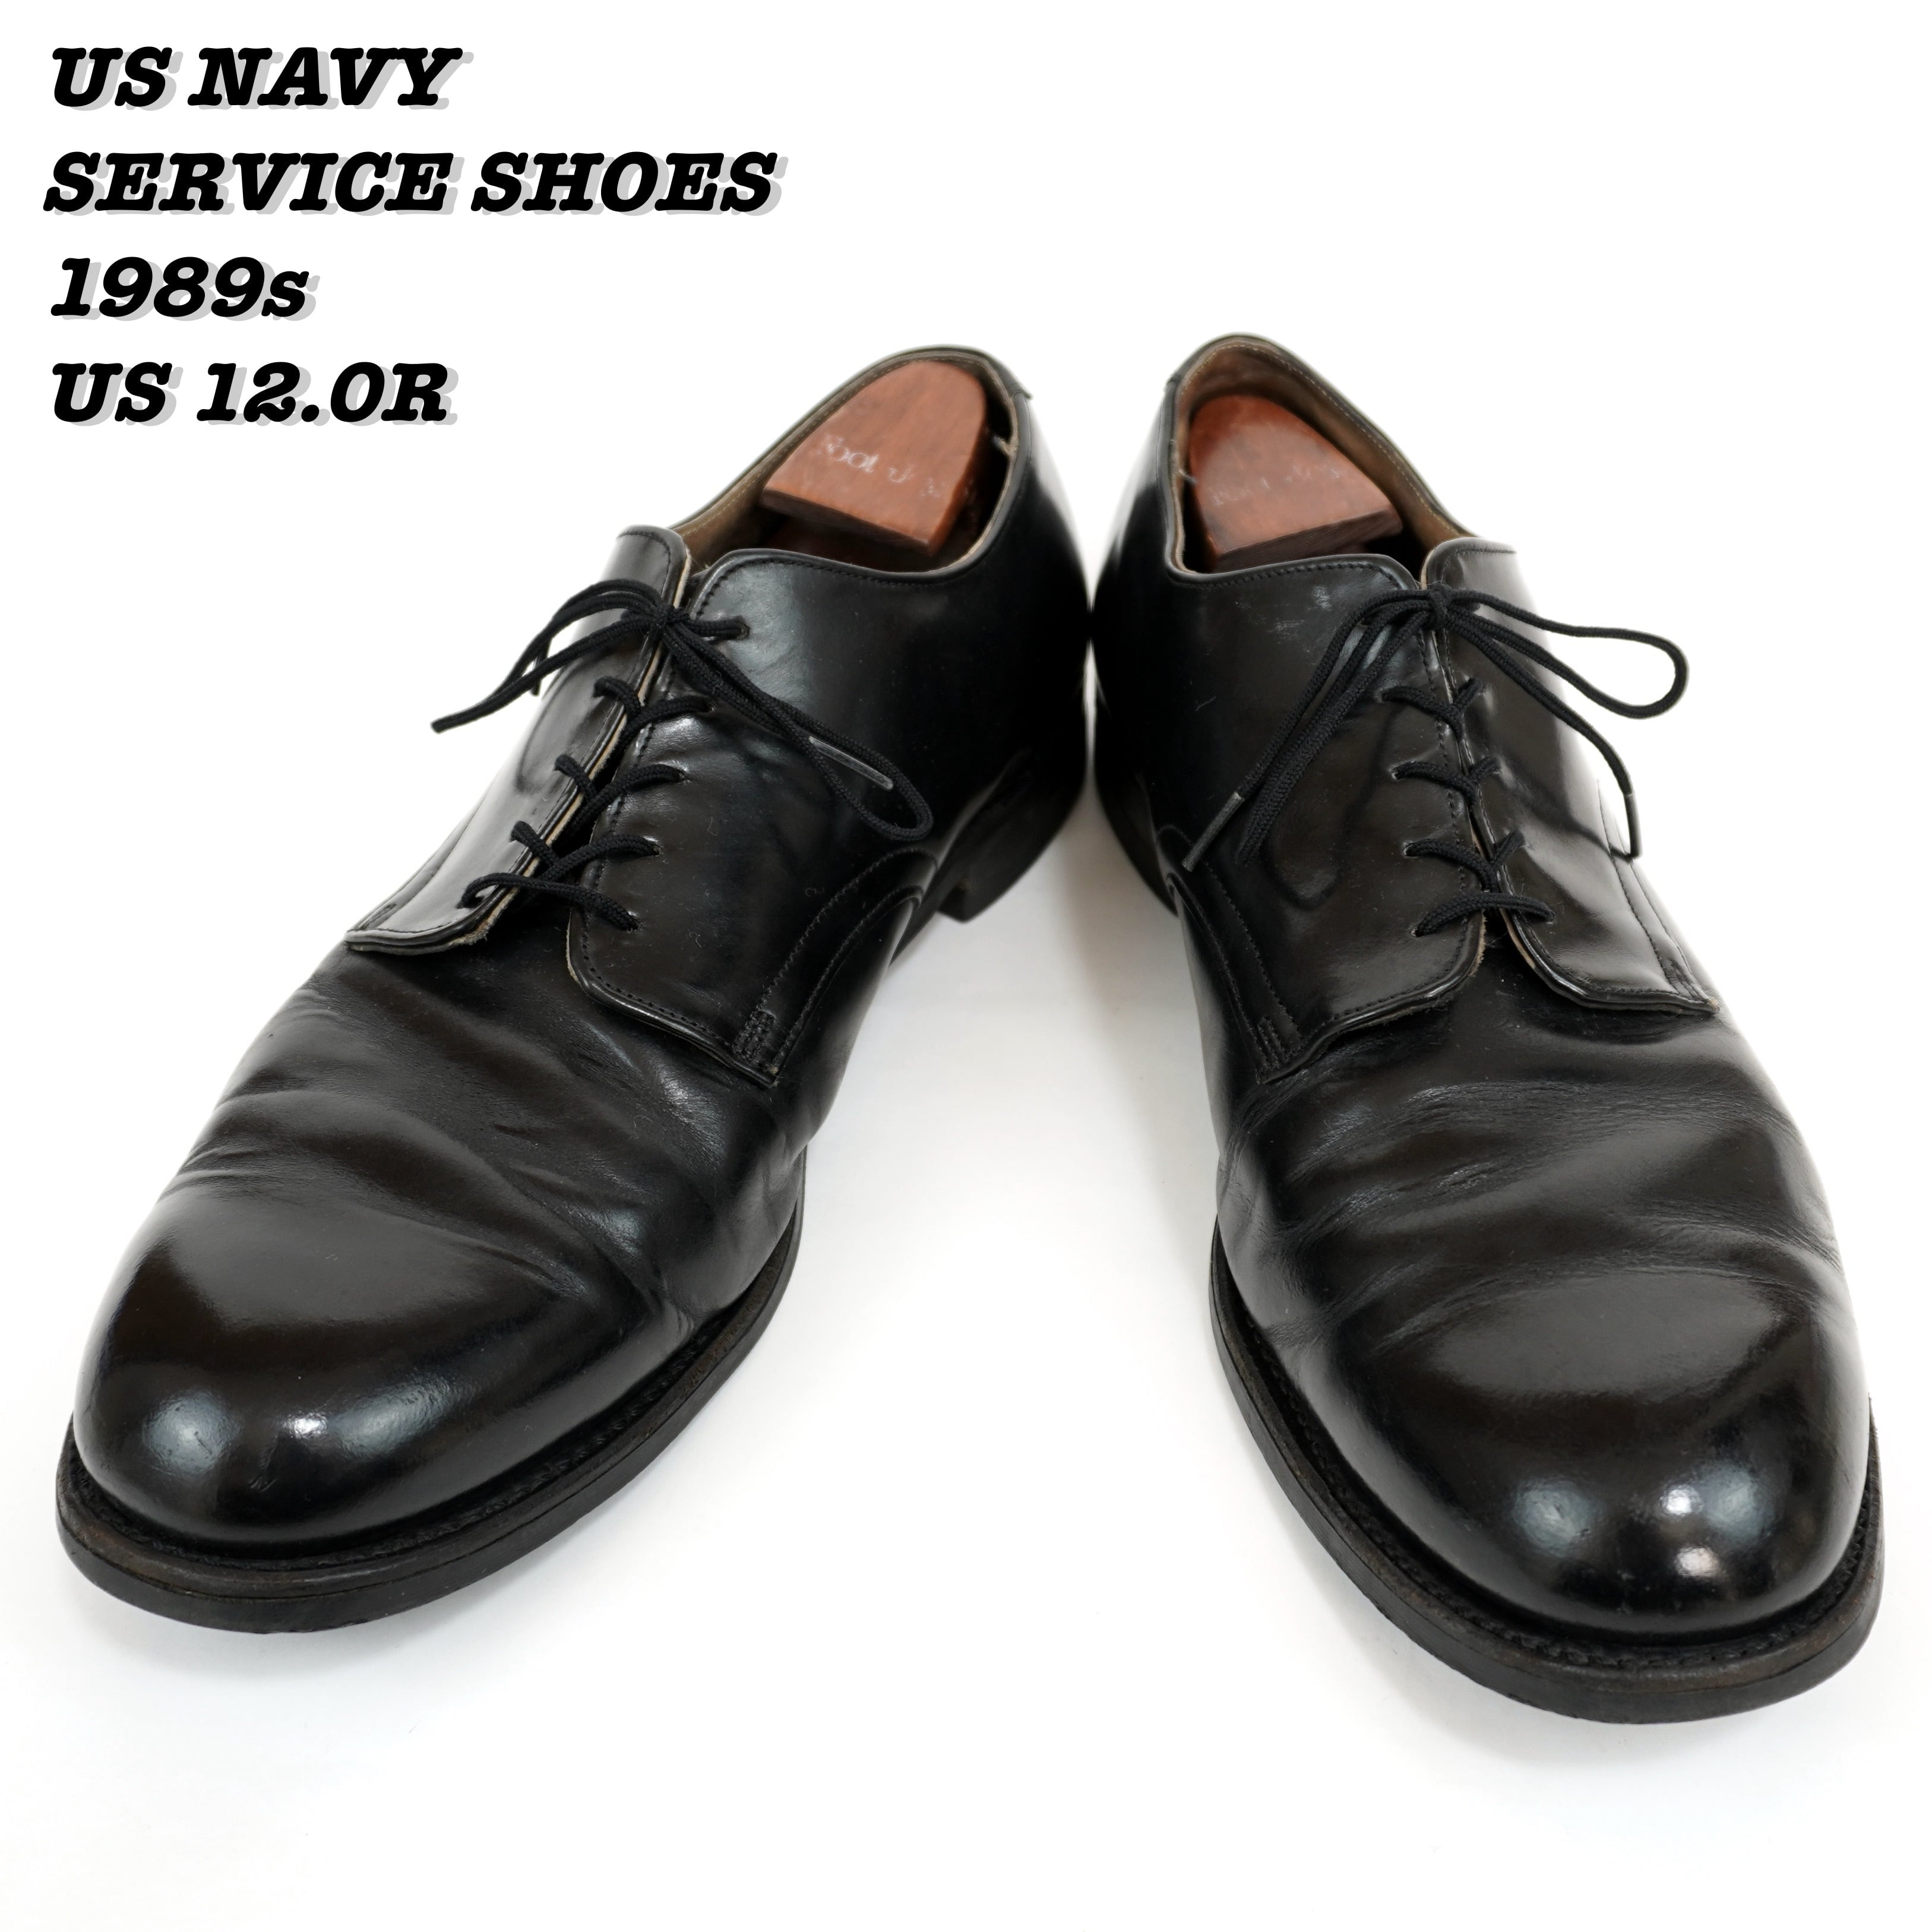 US NAVY SERVICE SHOES 1989s US12.0Rメンズ